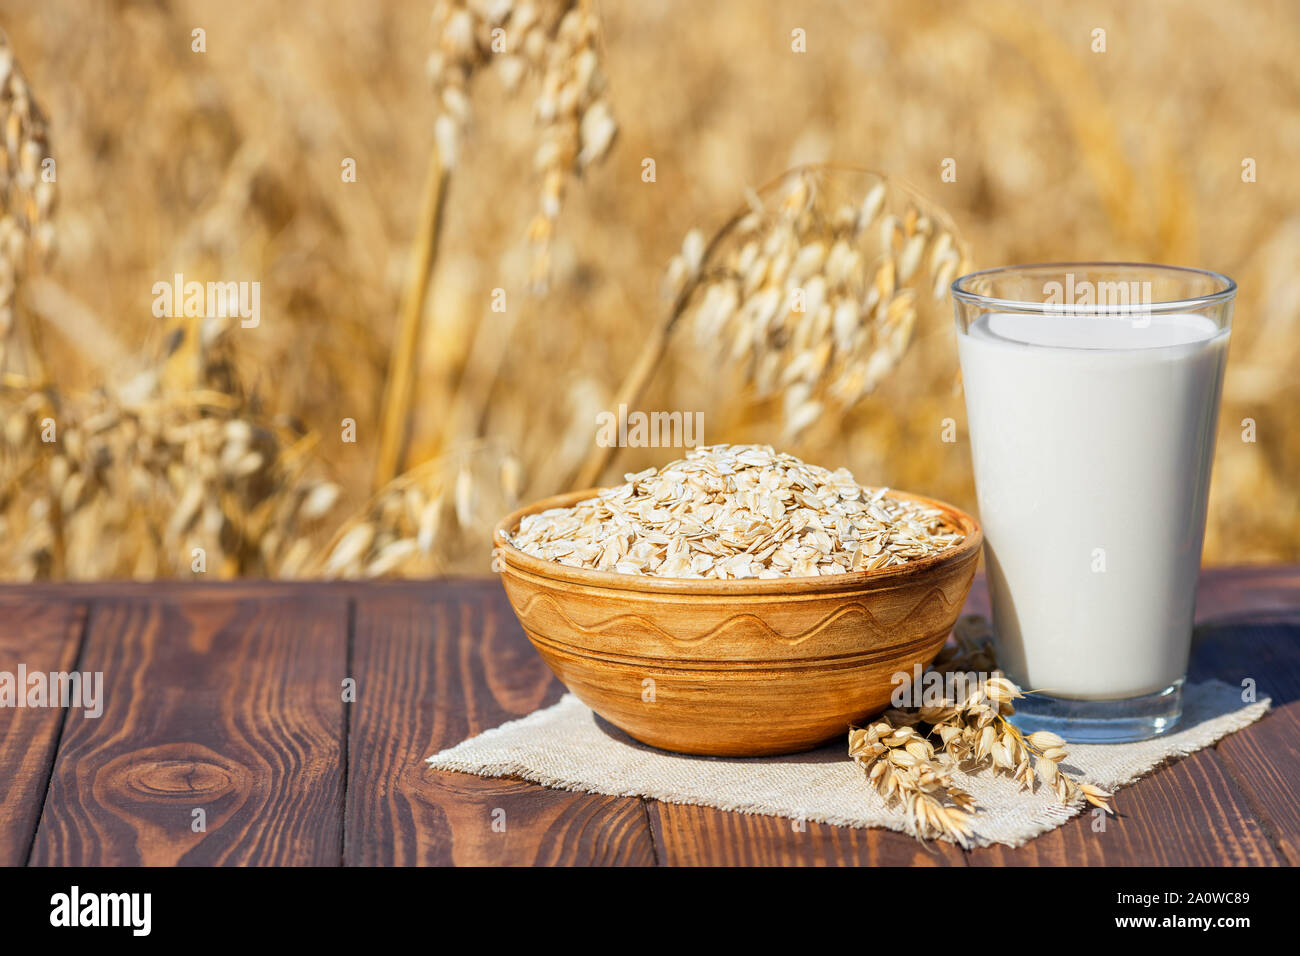 vegan oat milk in glass with uncooked oatmeal in bowl on table over against ripe cereal field Stock Photo